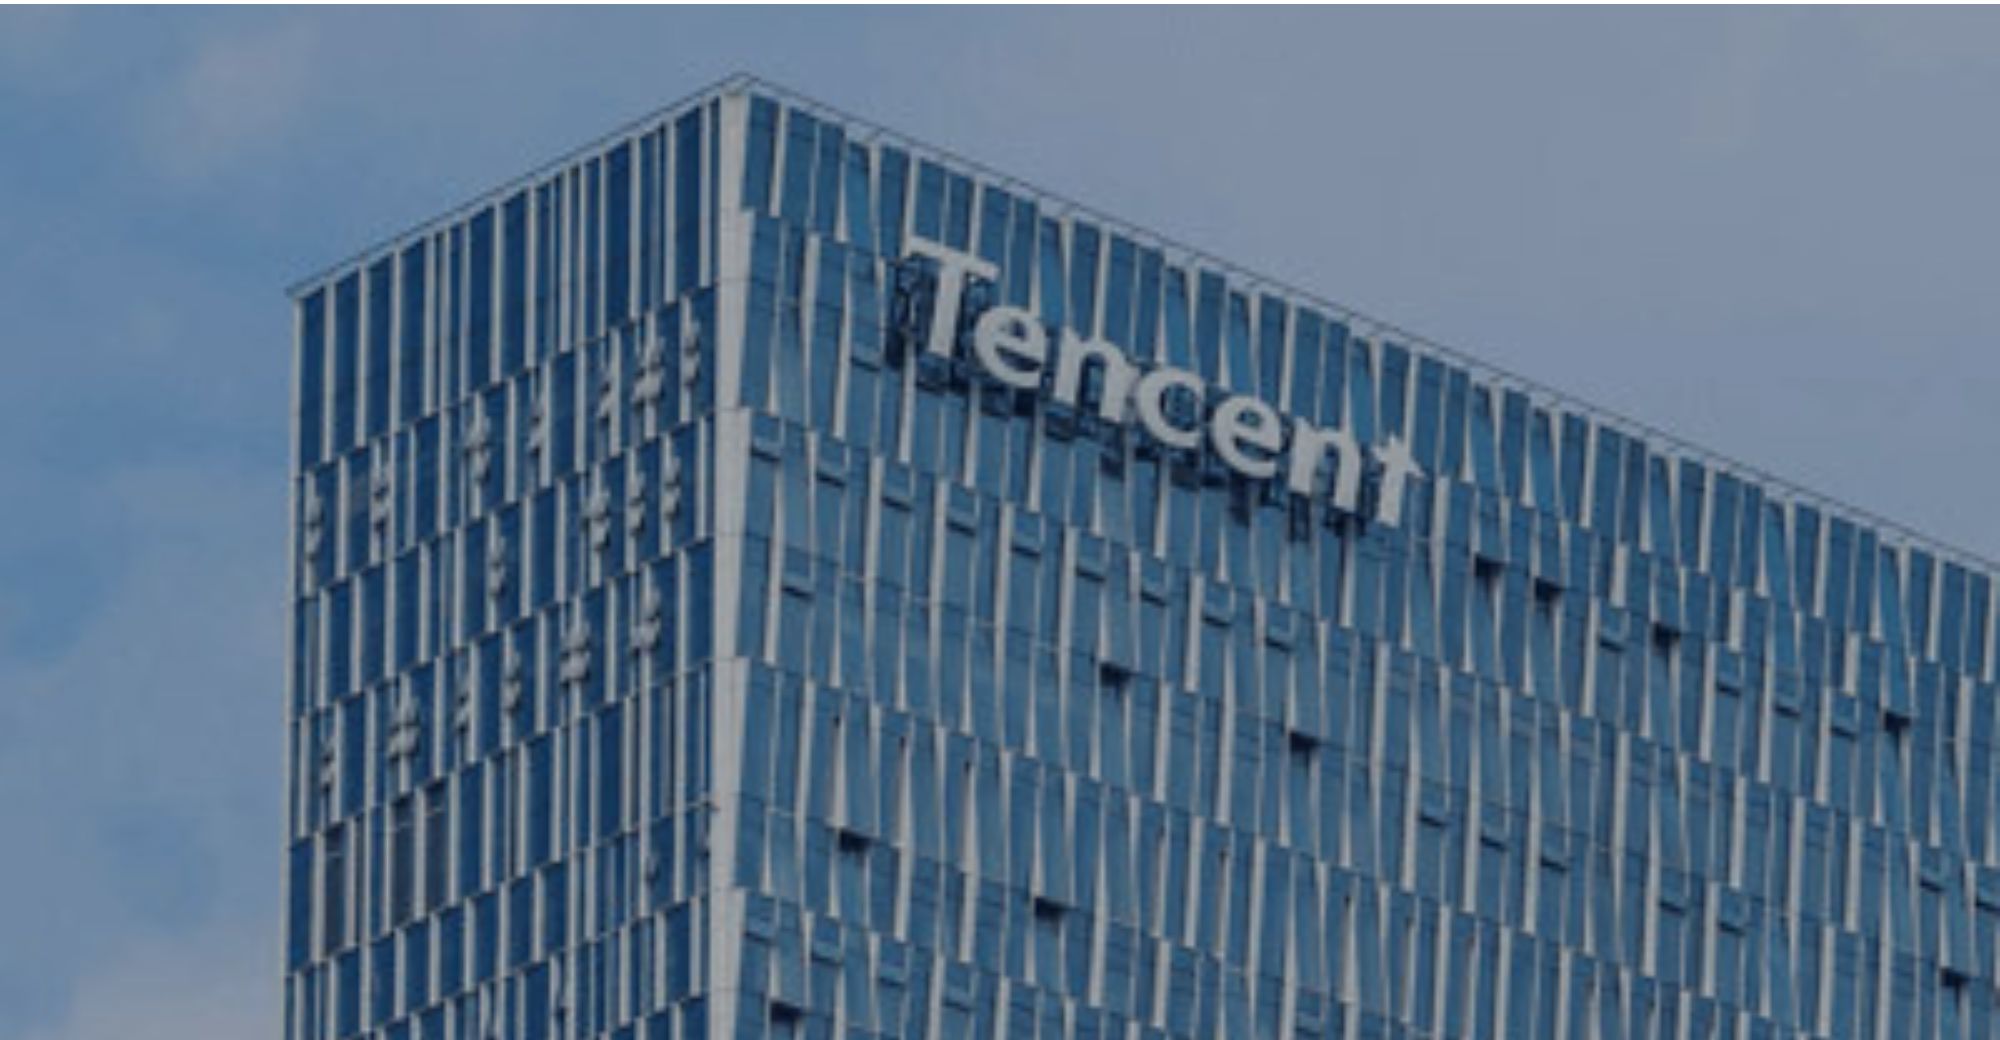 Tencent Spends 6.4 Billion Yuan to Acquire Land in Beijing